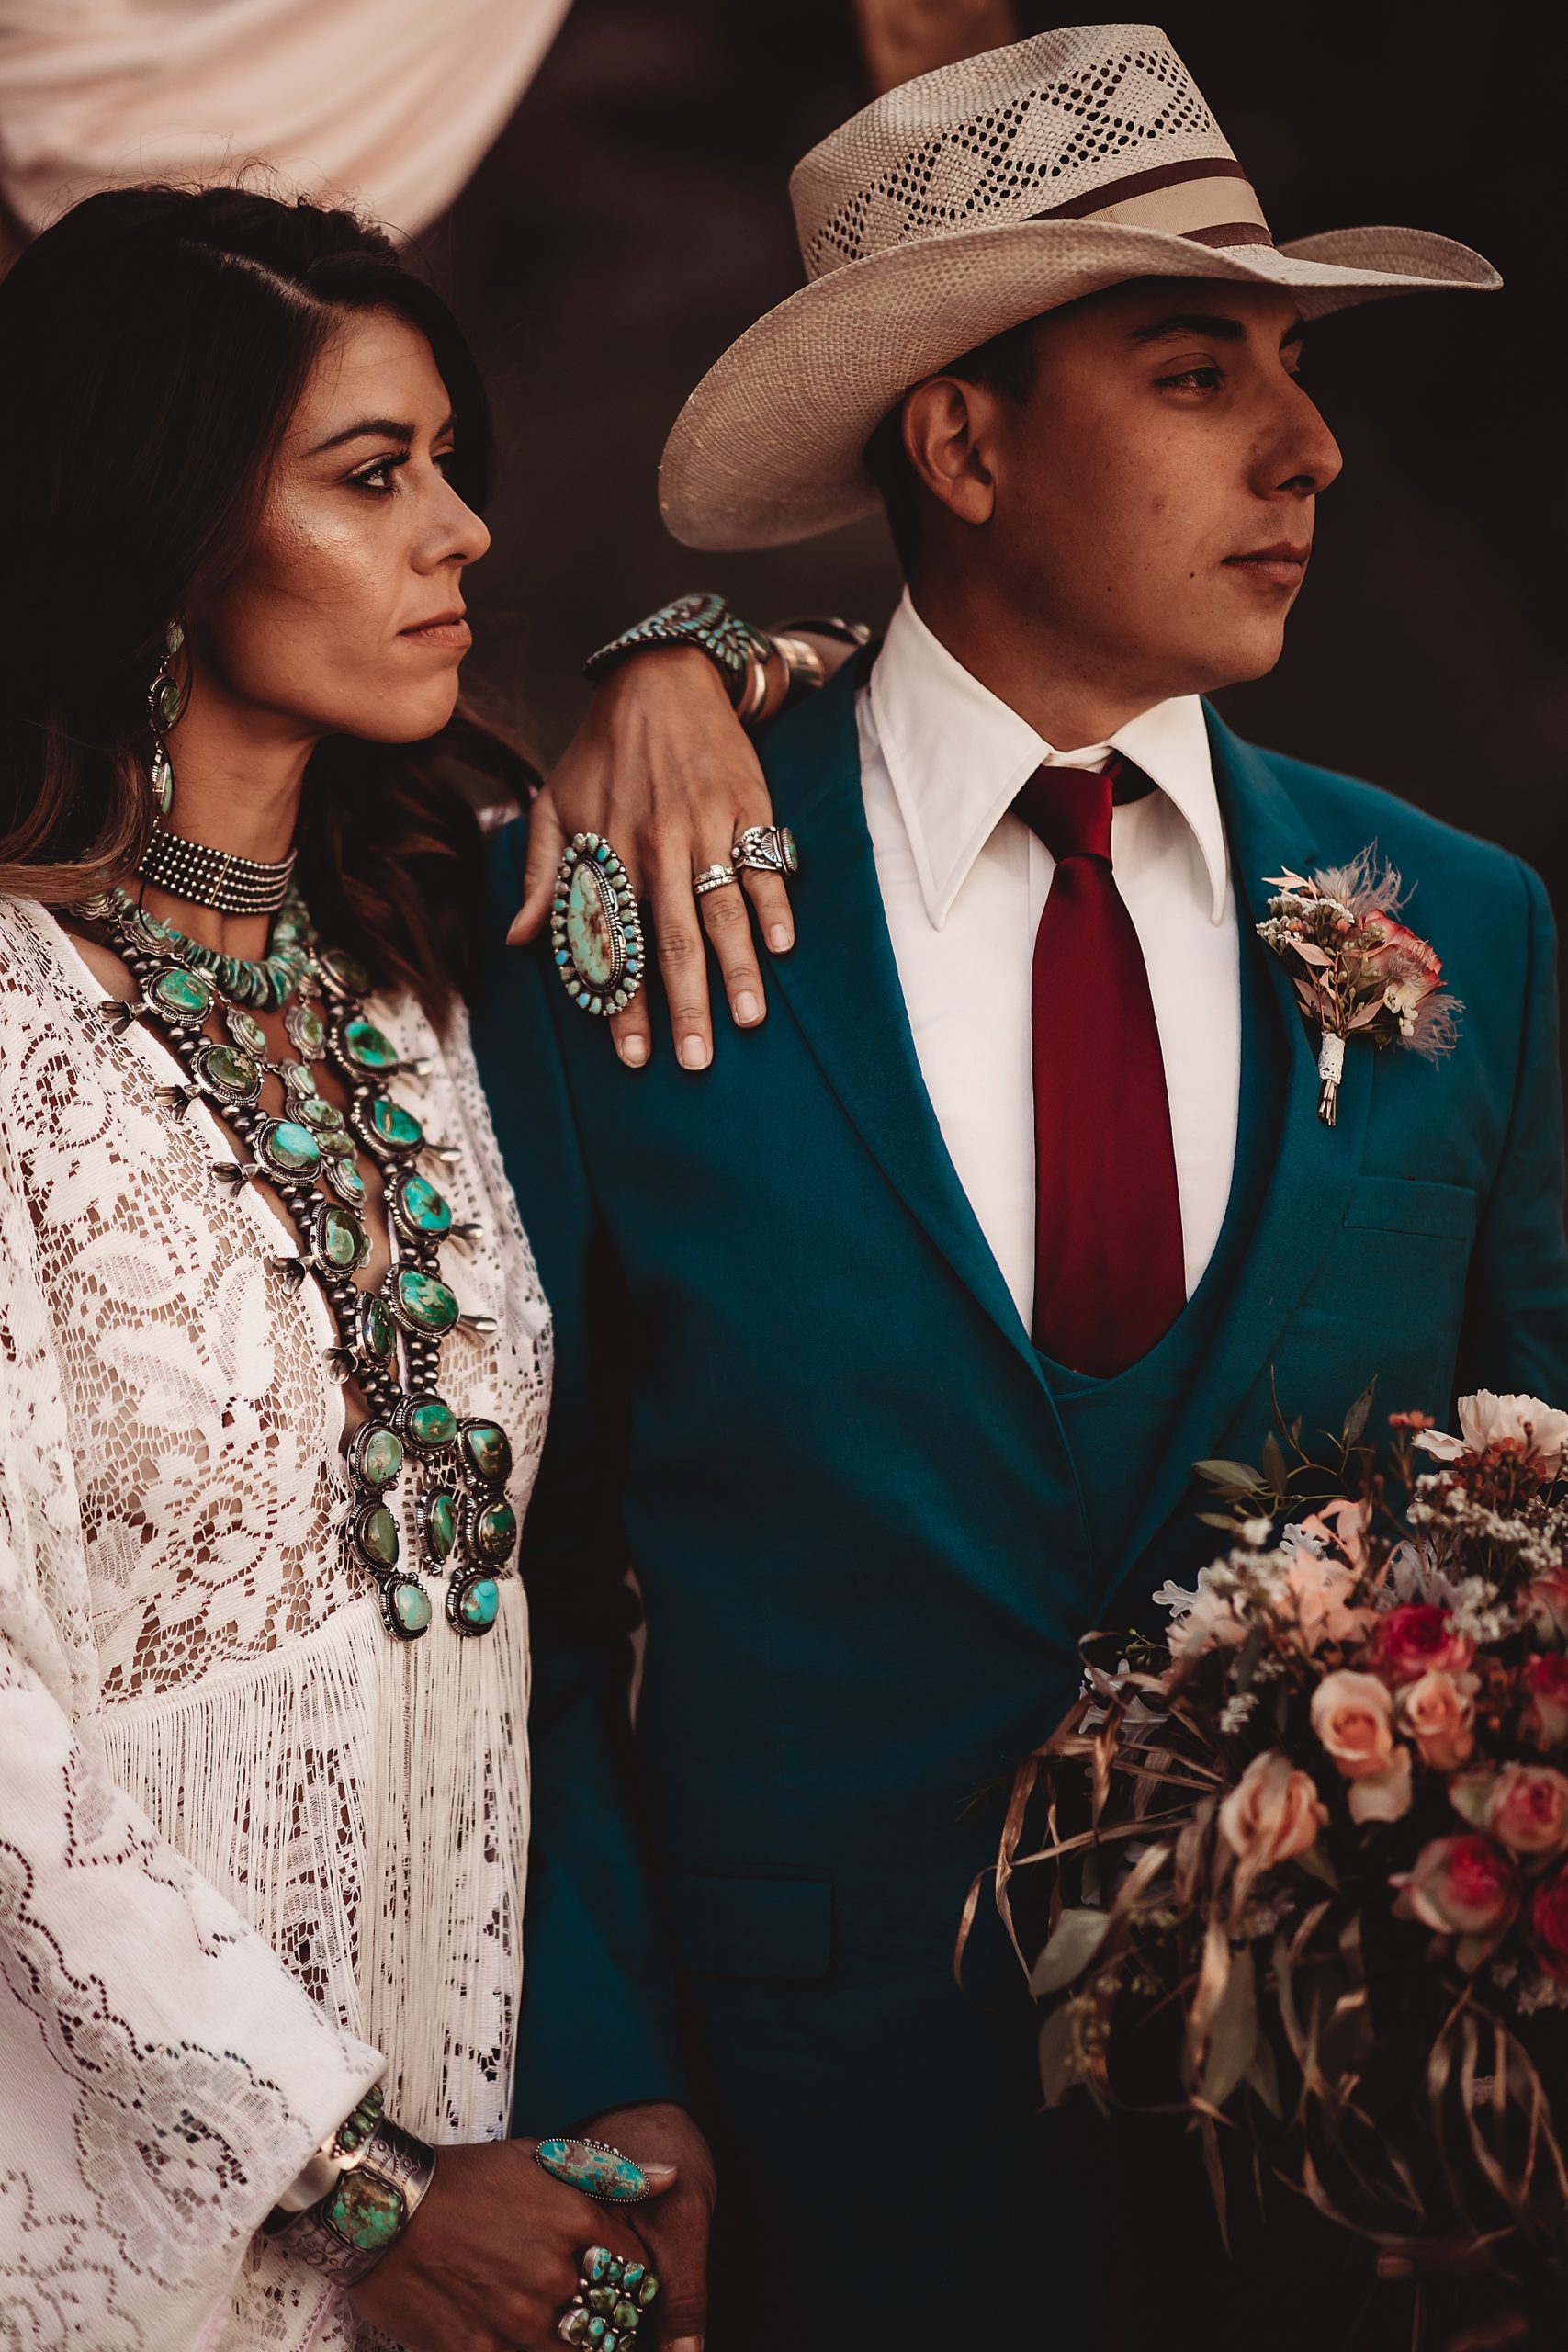 Western suits for wedding